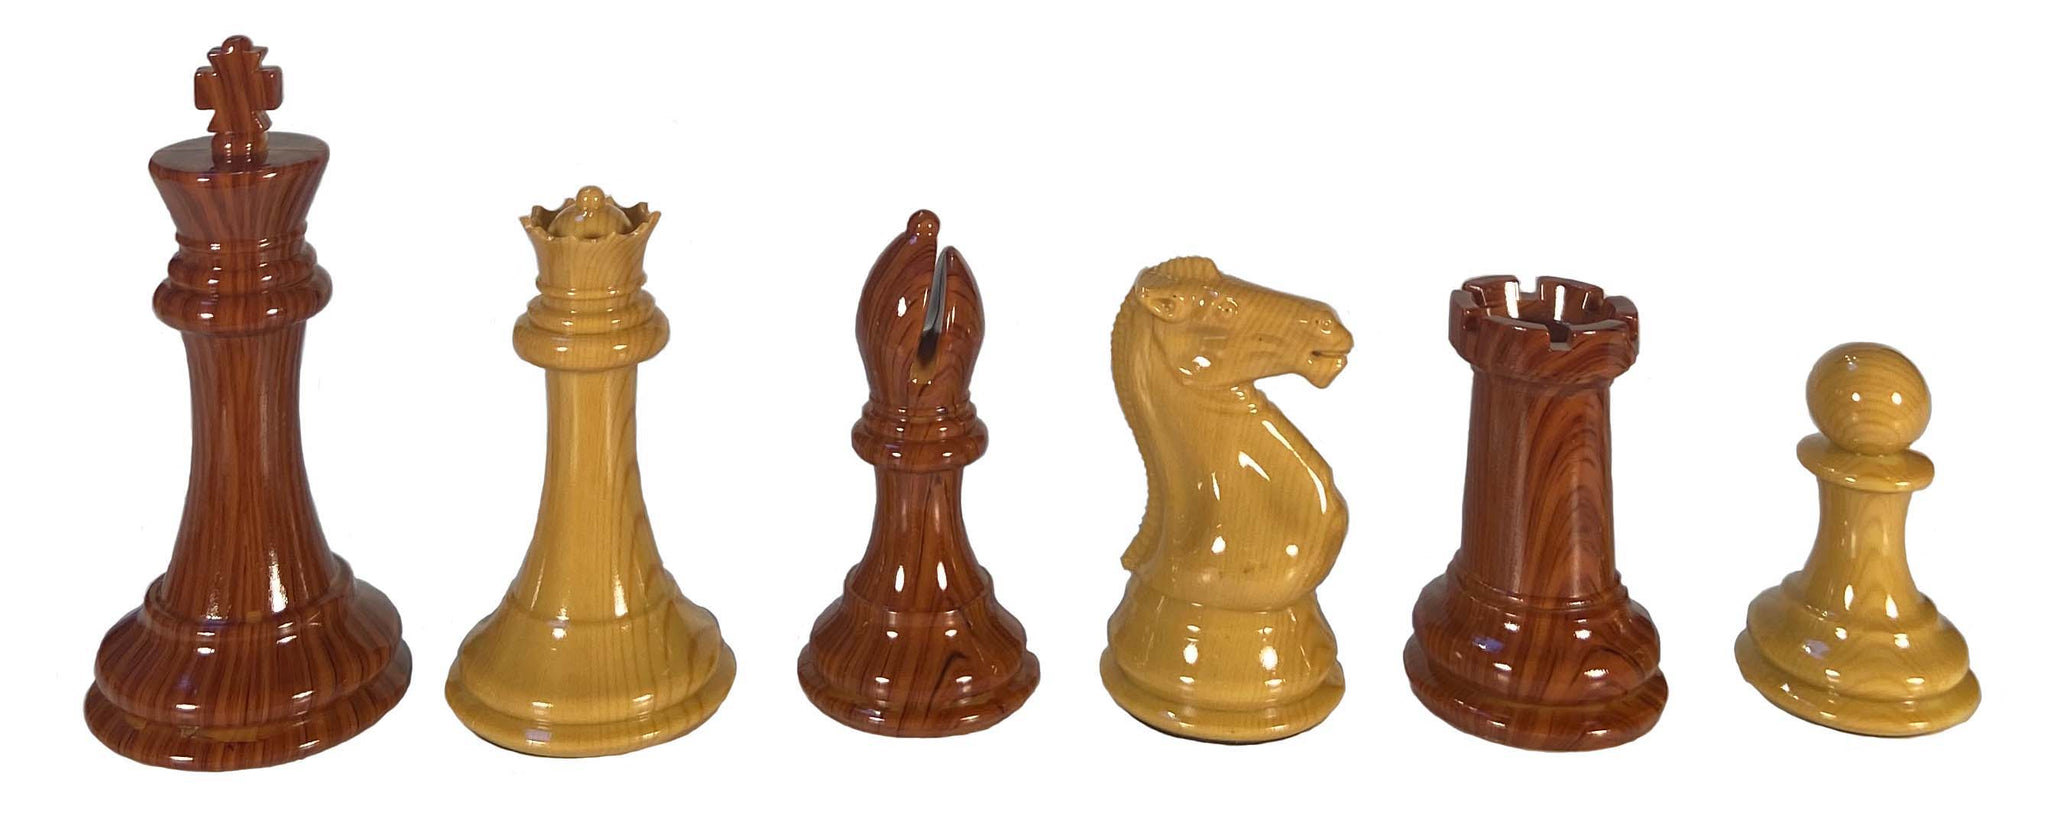 CLEARANCE SALE Mahogany Chess Board 16 Inches 